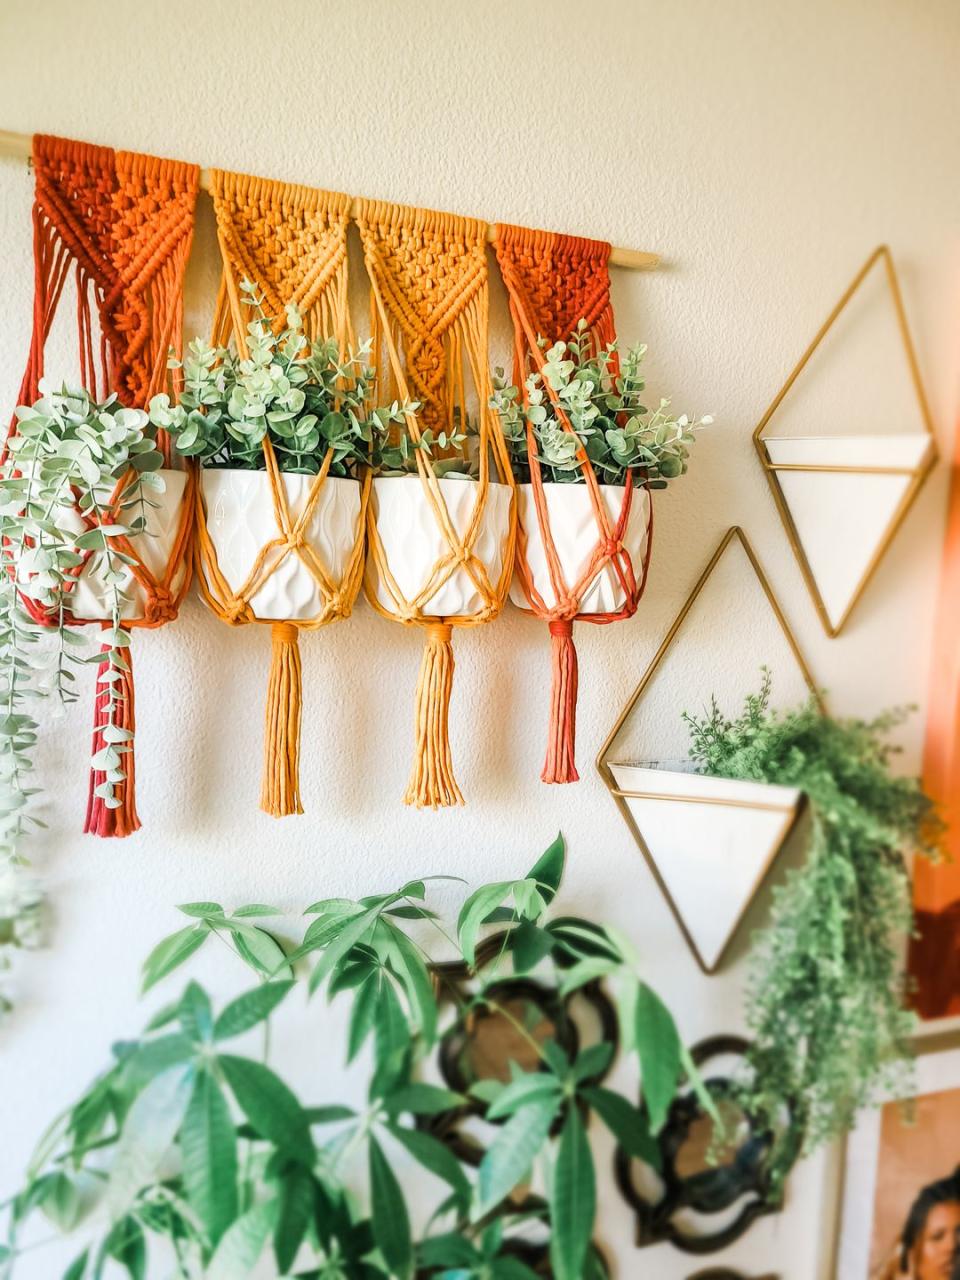 four plants hanging from colorful planters on the white wall